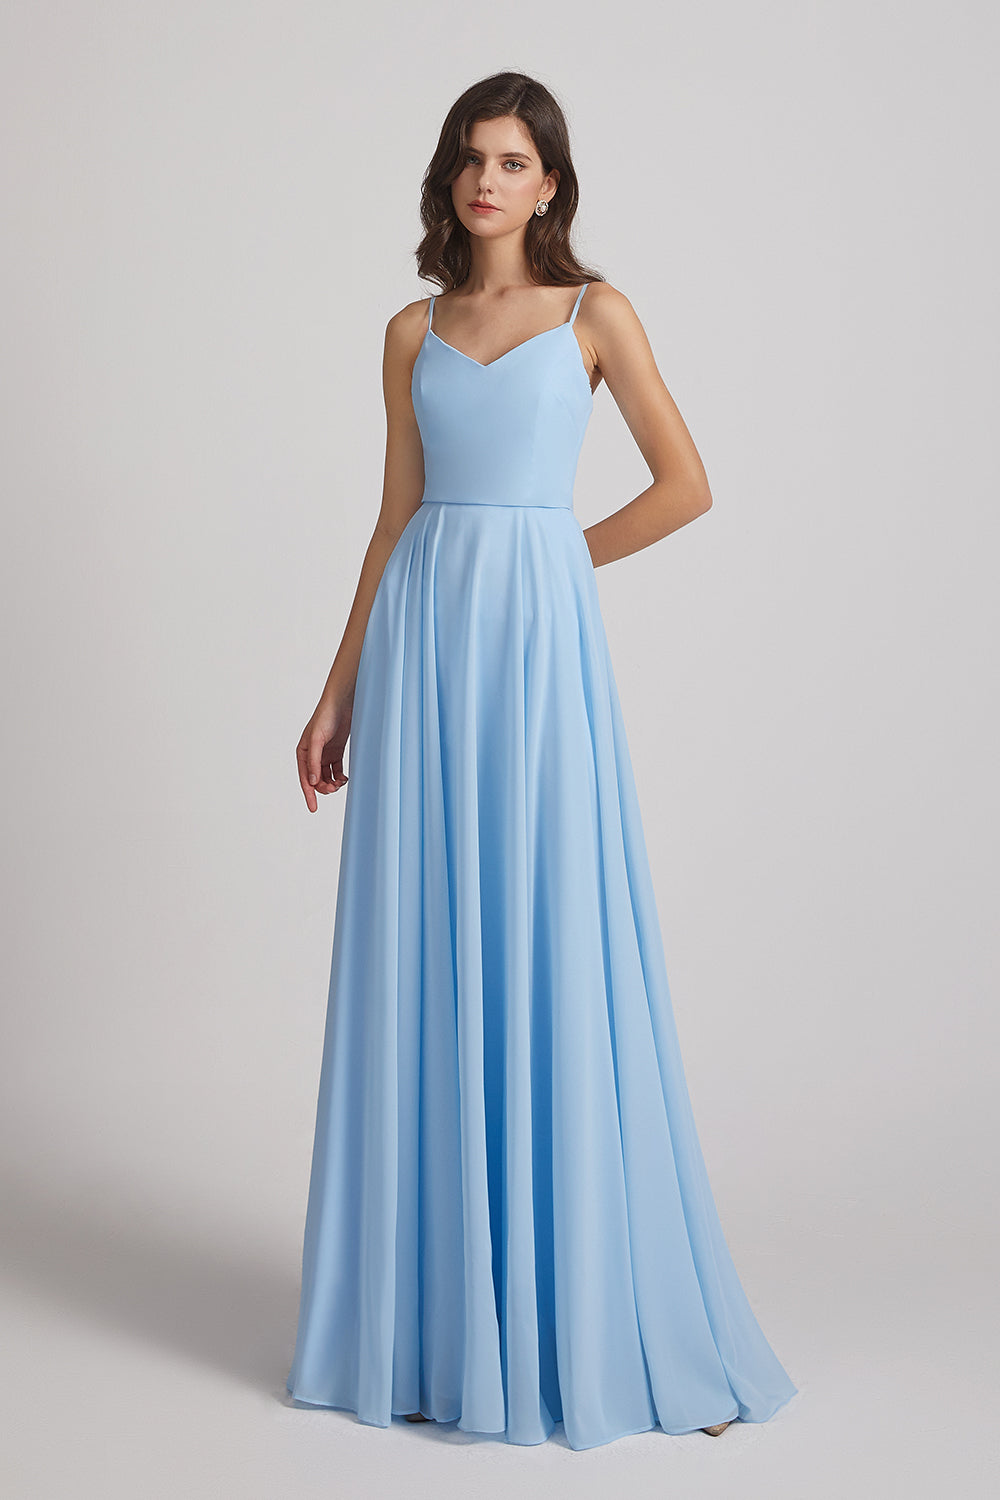 A-line formal unformal bridesmaid gowns